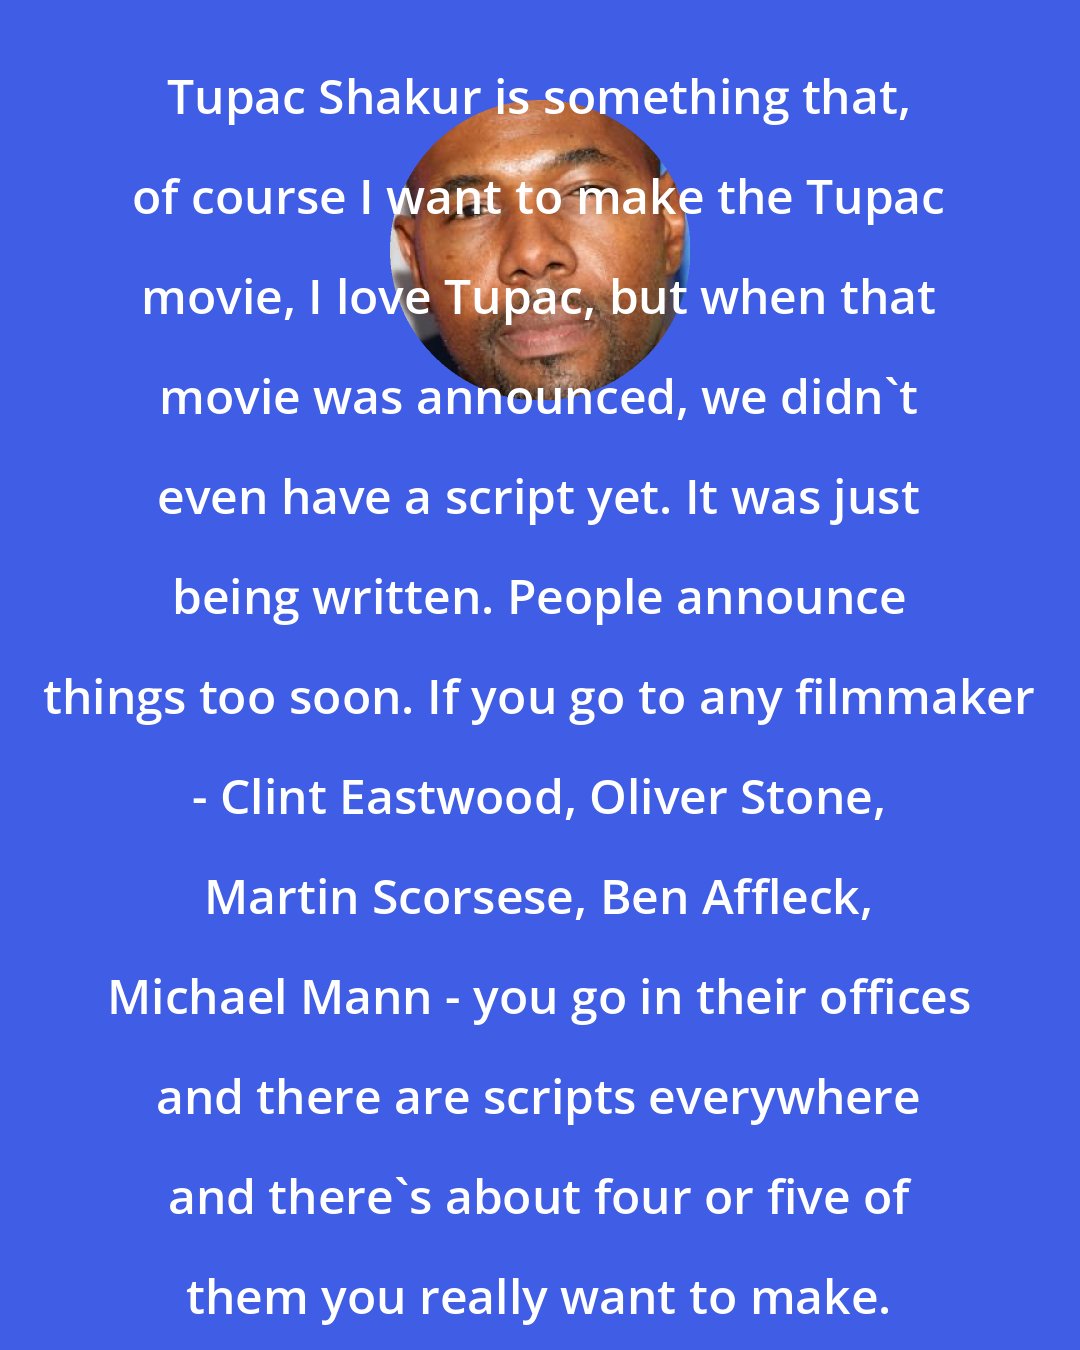 Antoine Fuqua: Tupac Shakur is something that, of course I want to make the Tupac movie, I love Tupac, but when that movie was announced, we didn't even have a script yet. It was just being written. People announce things too soon. If you go to any filmmaker - Clint Eastwood, Oliver Stone, Martin Scorsese, Ben Affleck, Michael Mann - you go in their offices and there are scripts everywhere and there's about four or five of them you really want to make.